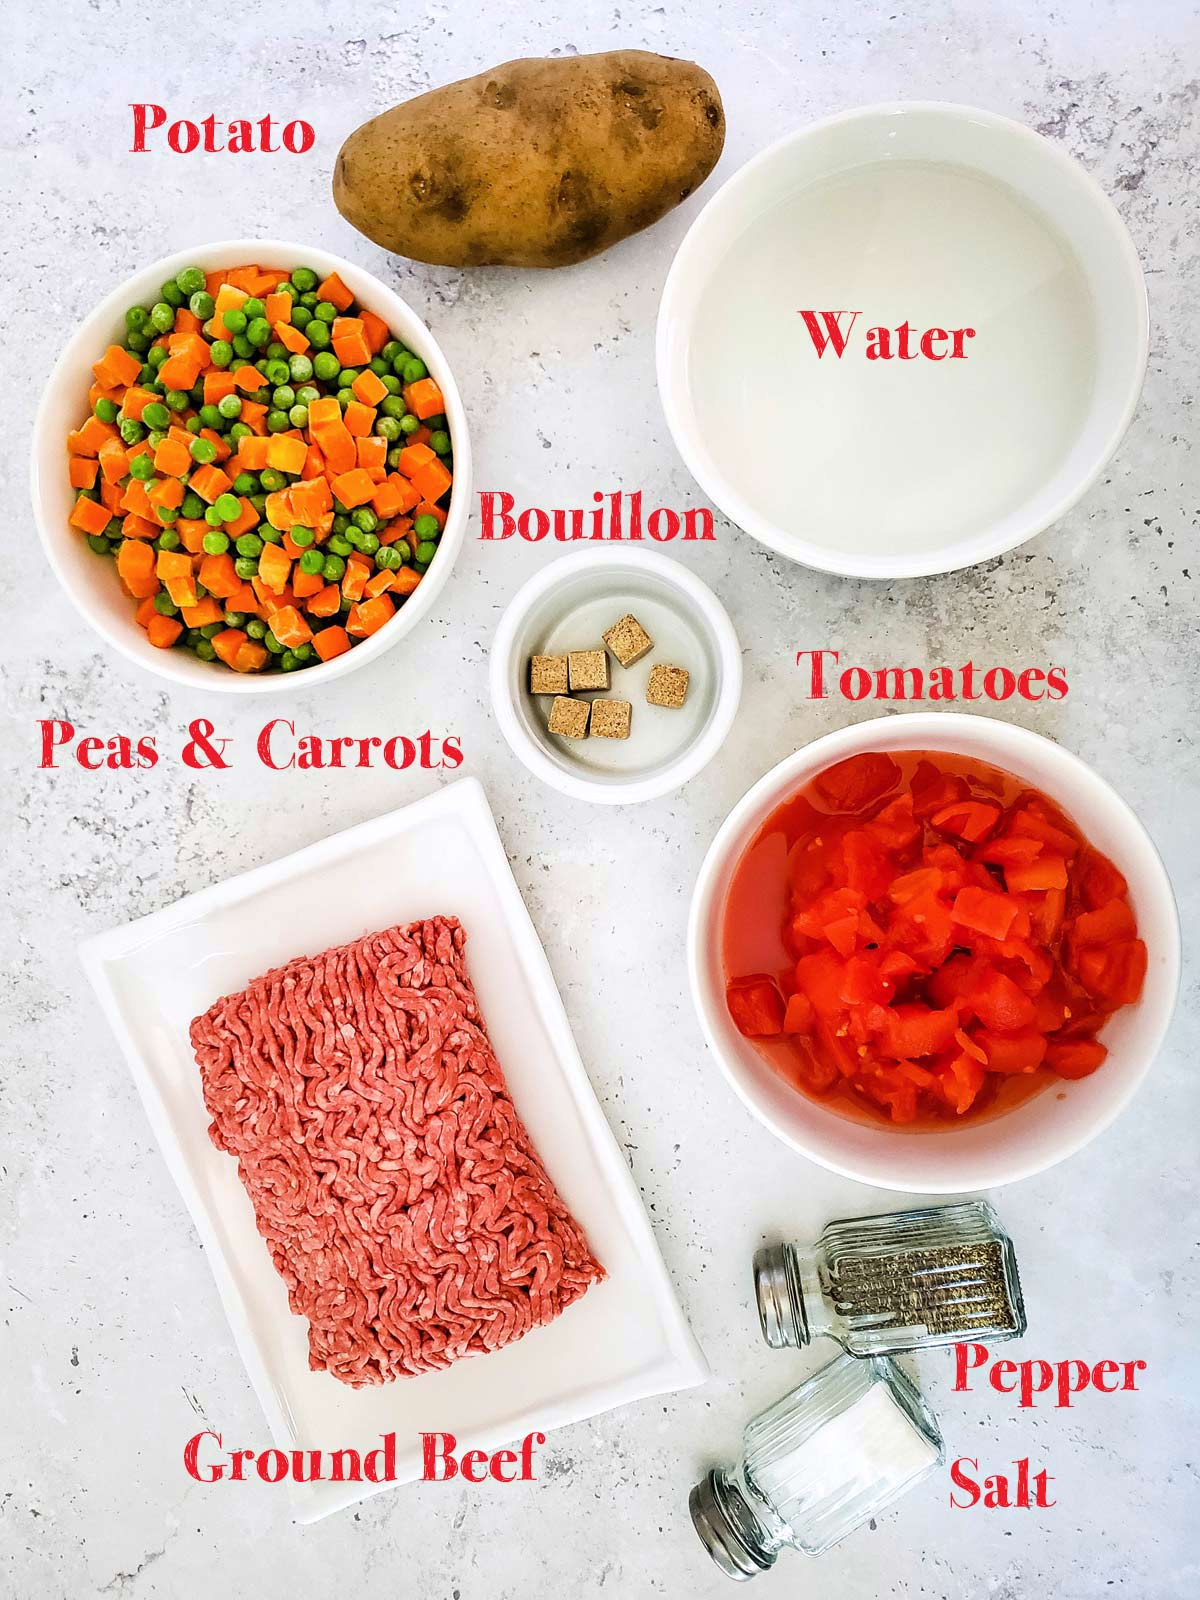 All of the ingredients for Crockpot Ground Beef Vegetable Soup Recipe.